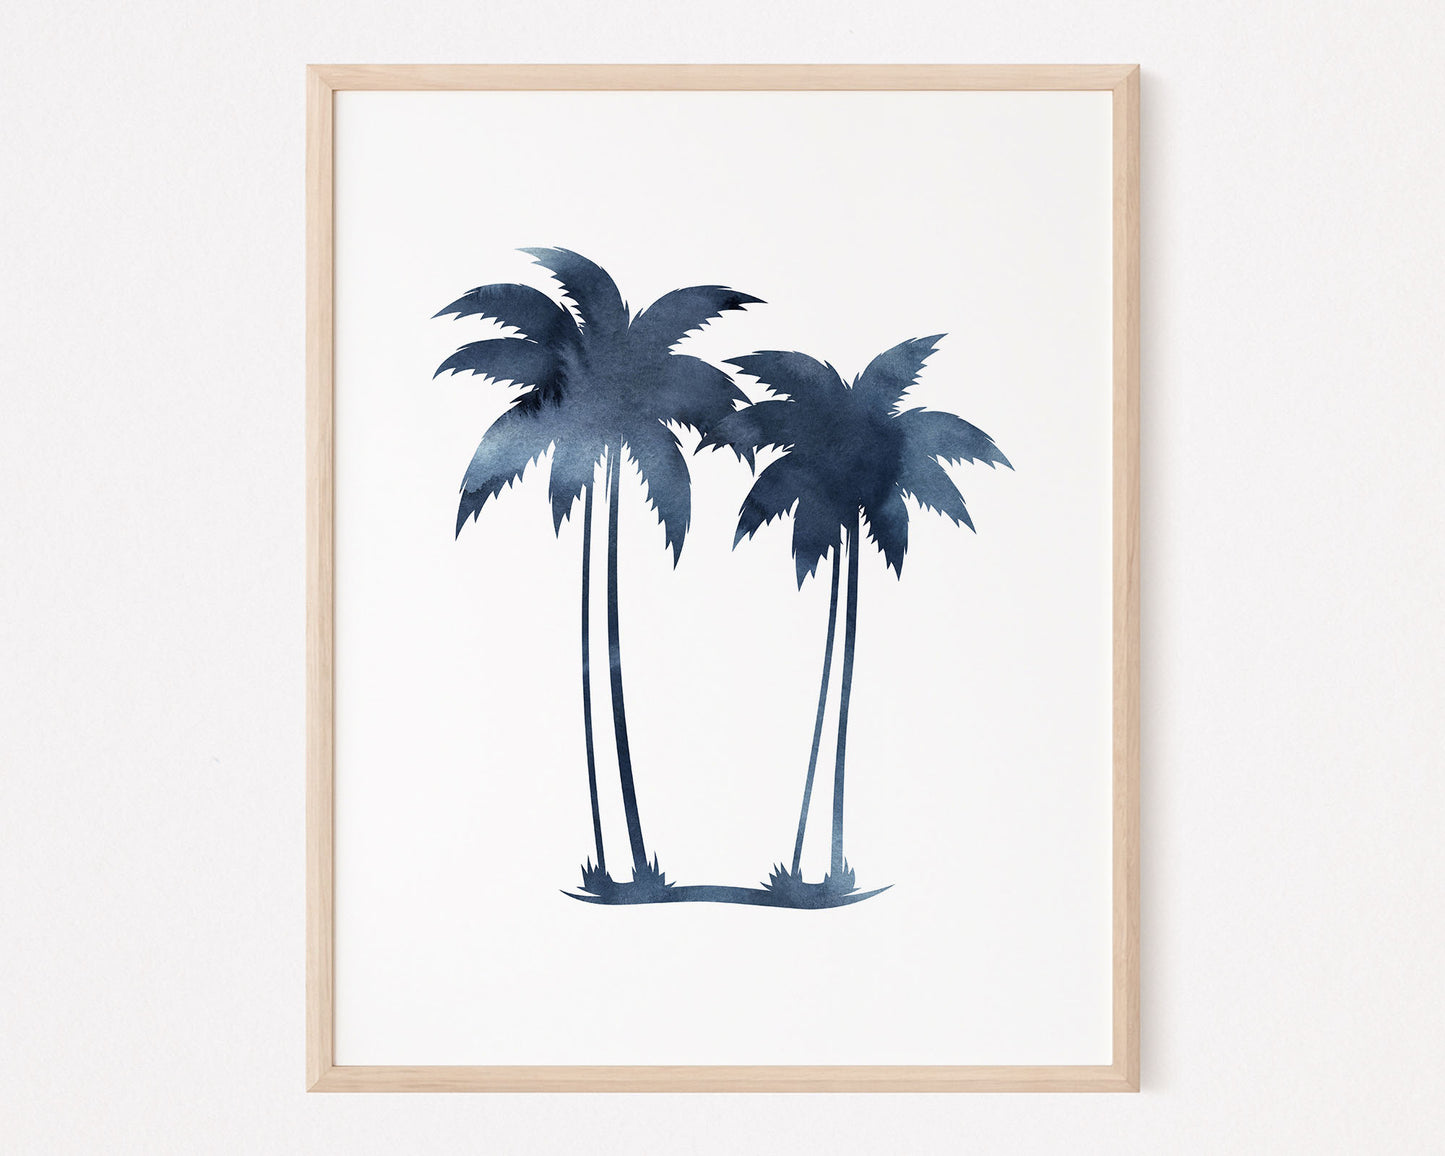 Watercolor Surf Themed Printable Wall Art featuring deep dark navy blue watercolor silhouettes of Palm Trees.